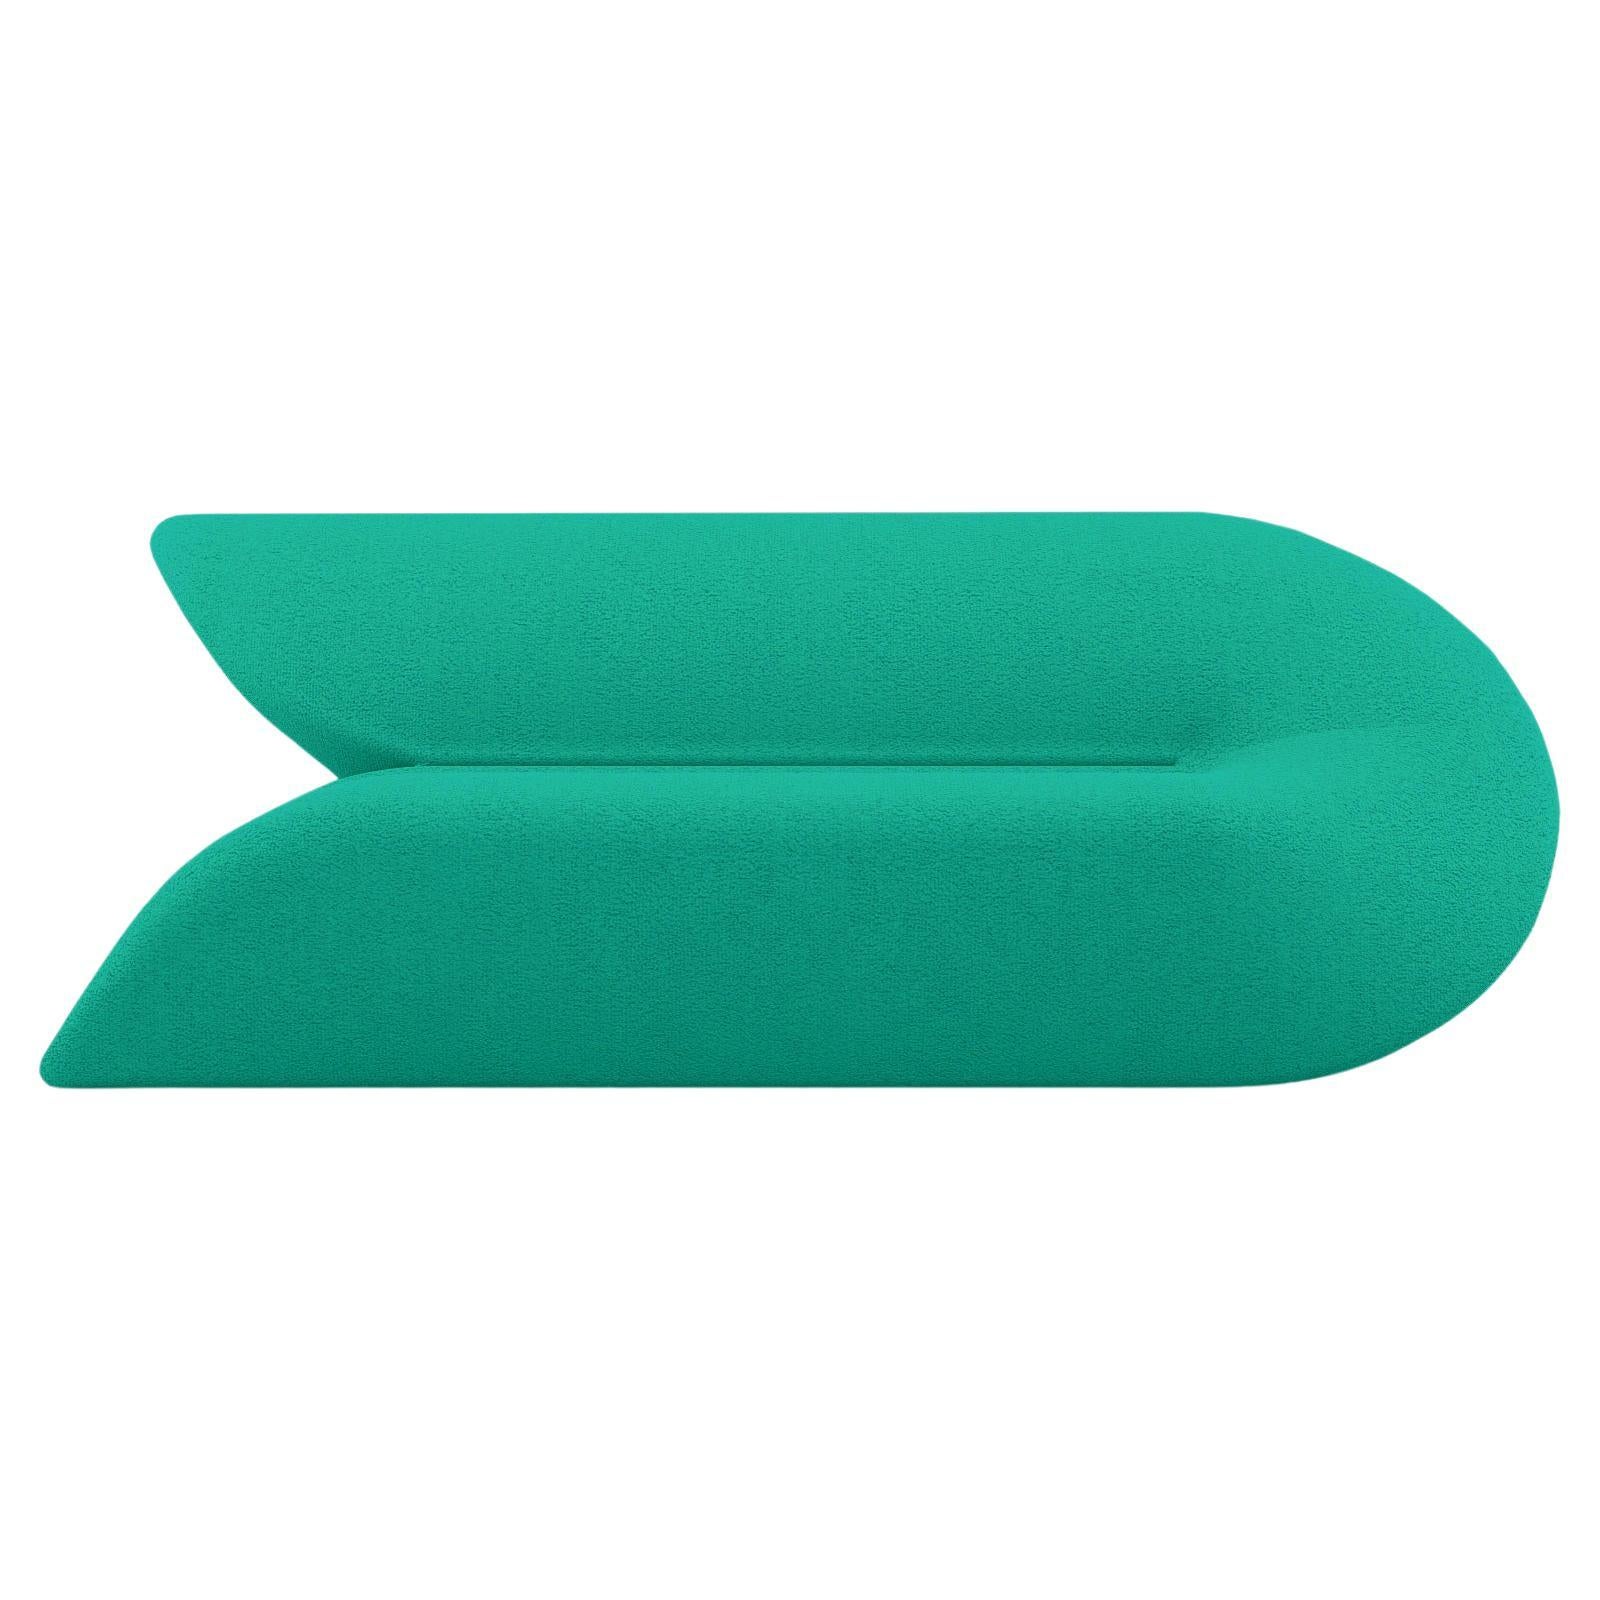 Delta Sofa - Modern Turquoise Upholstered Three Seat Sofa For Sale